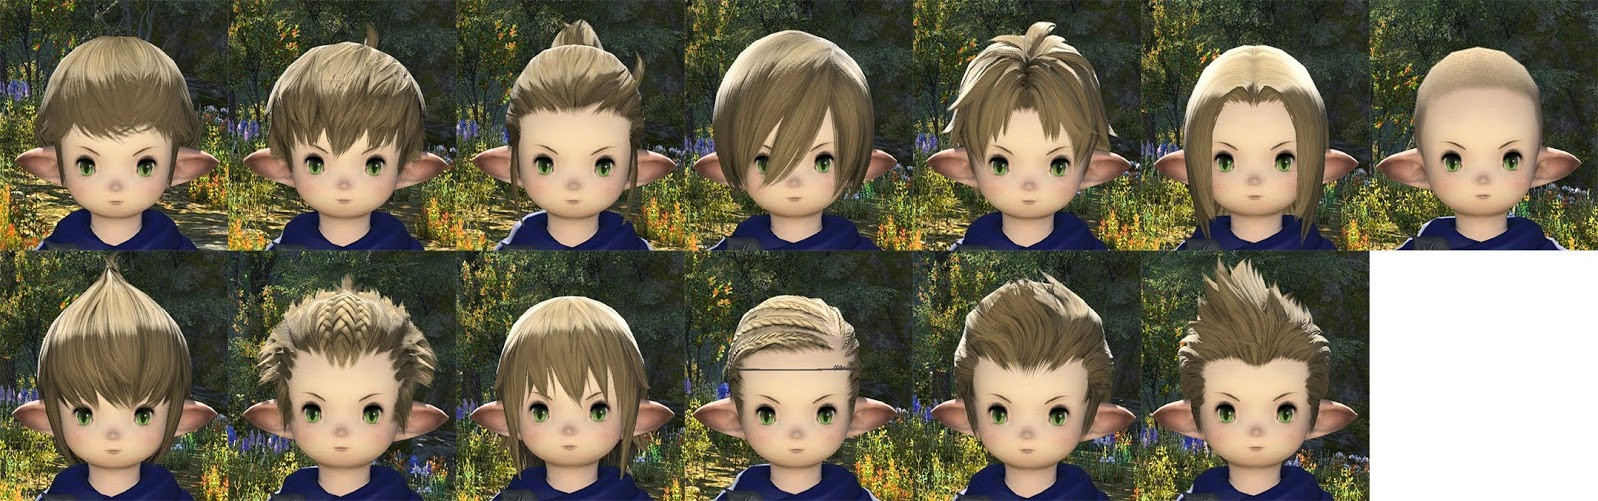 Ffxiv Male Hairstyles
 FFXIV Character Creation – Ald Shot First